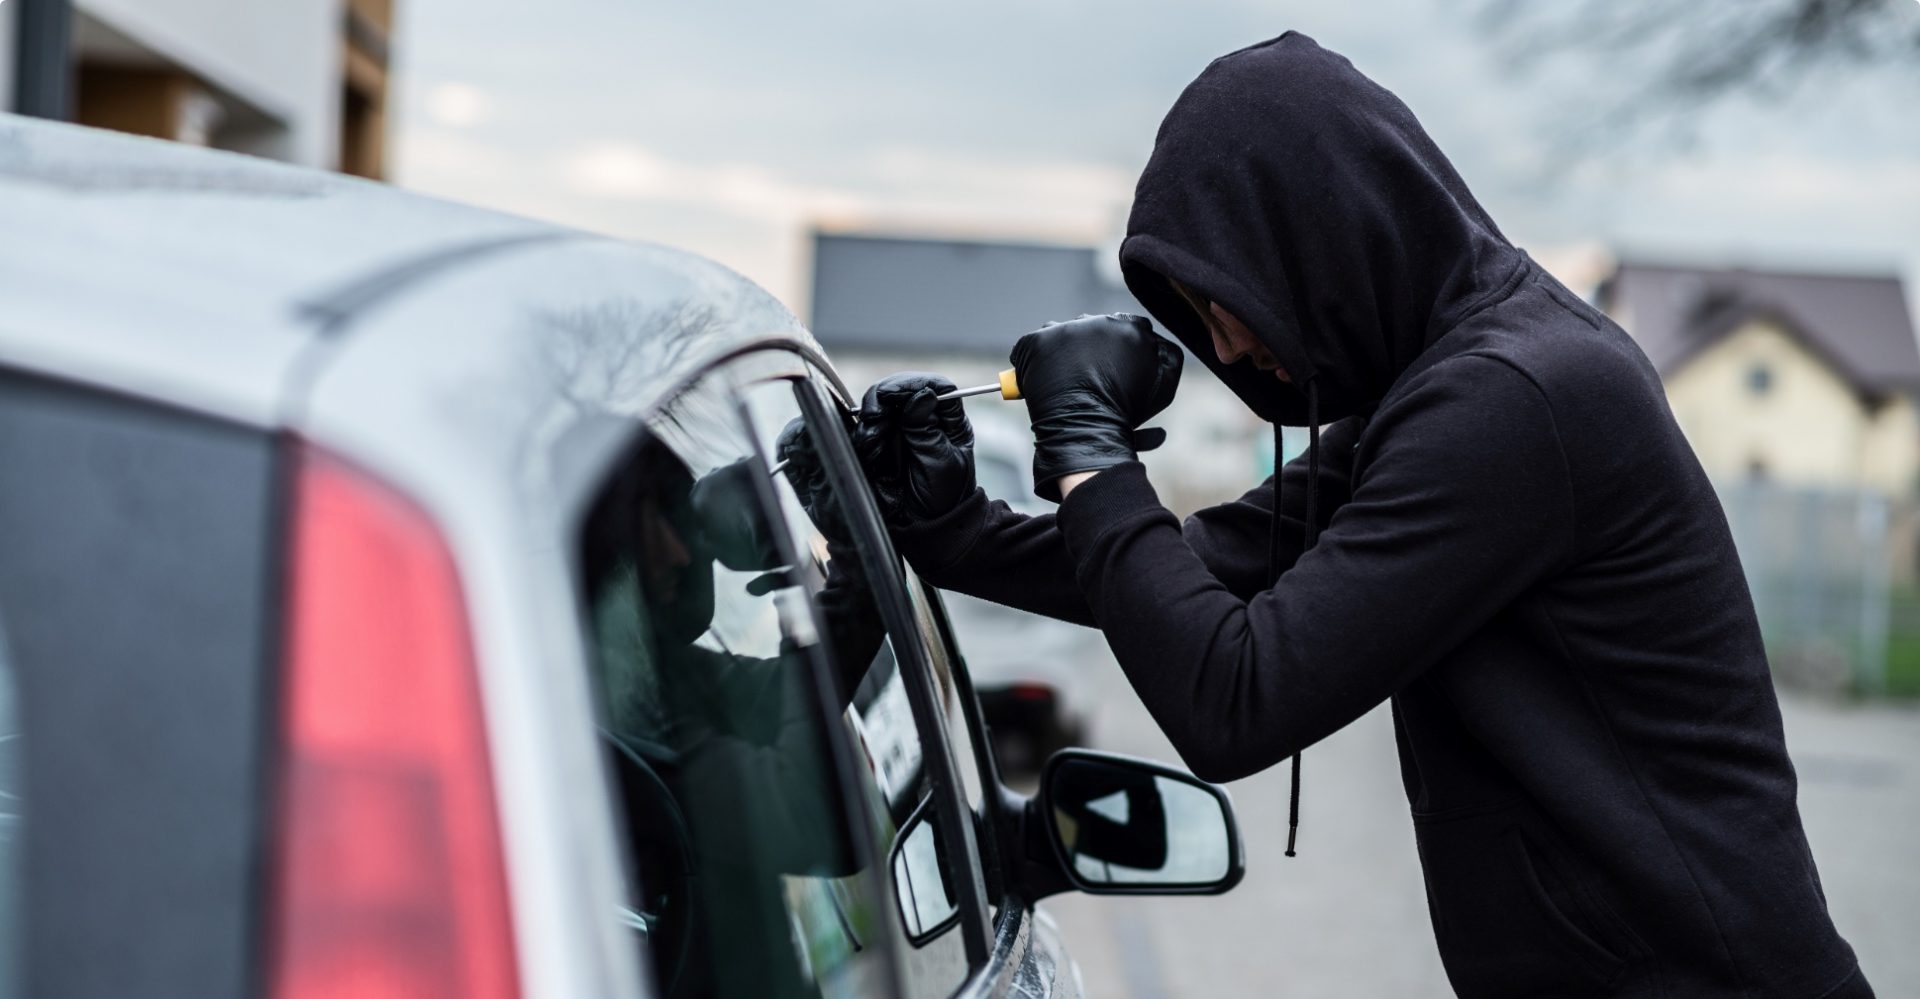 Auto theft up across the state, Colorado State Patrol advises drivers how to protect their cars